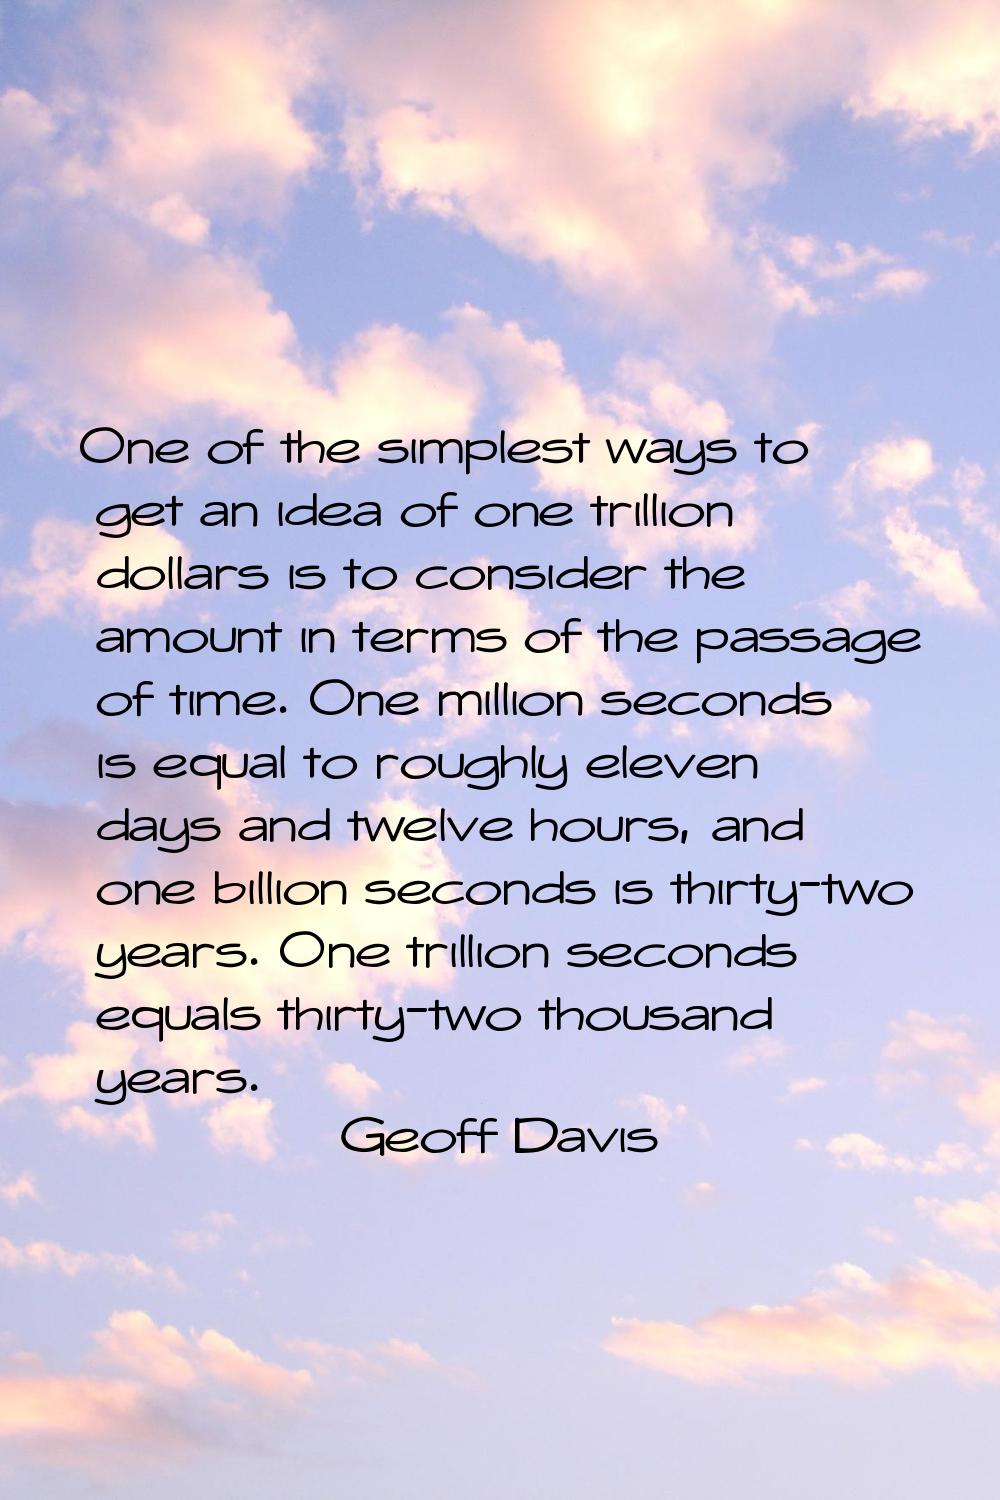 One of the simplest ways to get an idea of one trillion dollars is to consider the amount in terms 